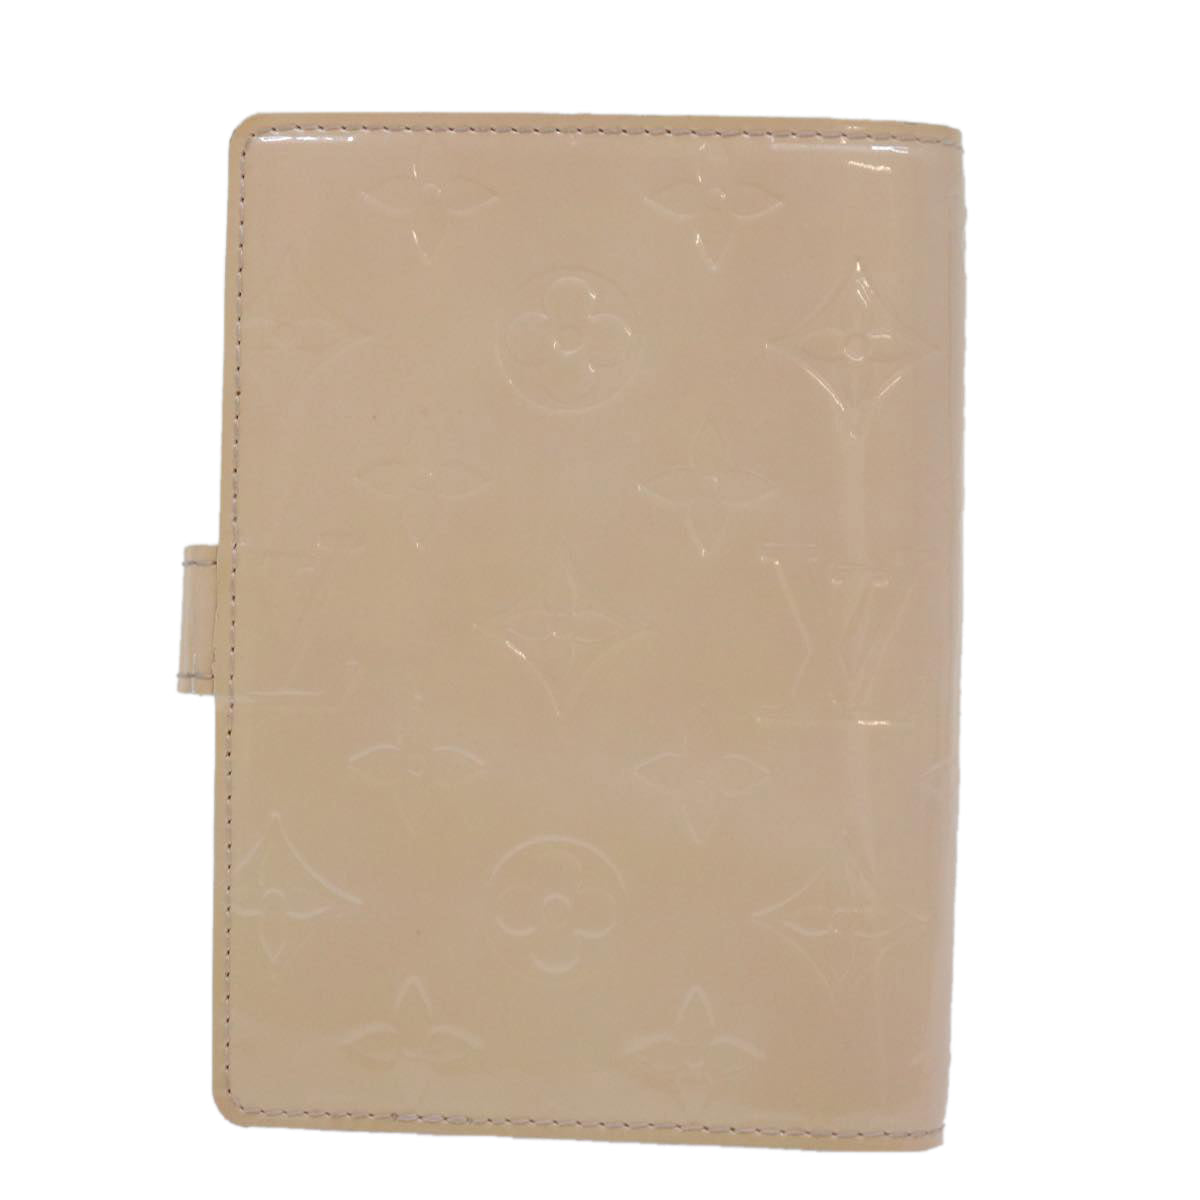 LOUIS VUITTON Vernis Agenda PM Day Planner Cover Pink R2101F LV Auth hk1004 - 0